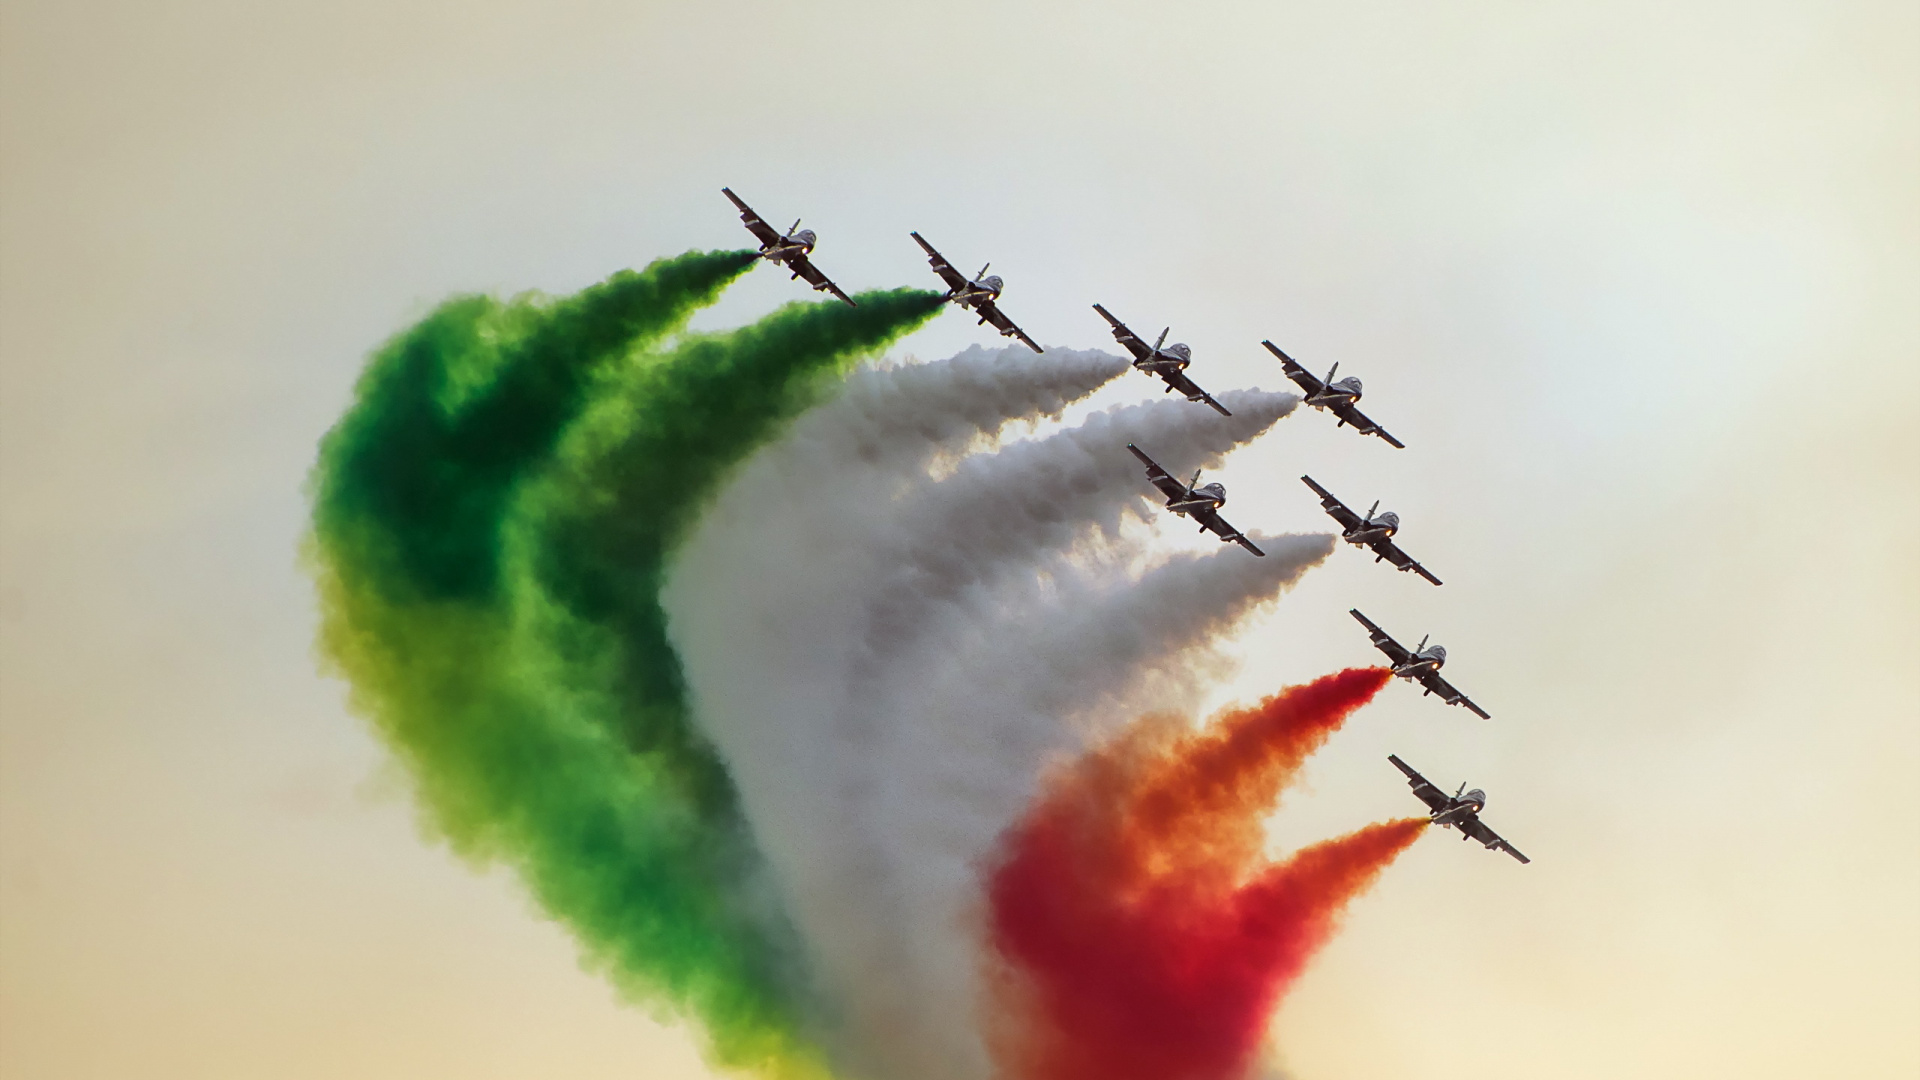 Five Black Birds Flying Over Green White and Red Smoke. Wallpaper in 1920x1080 Resolution